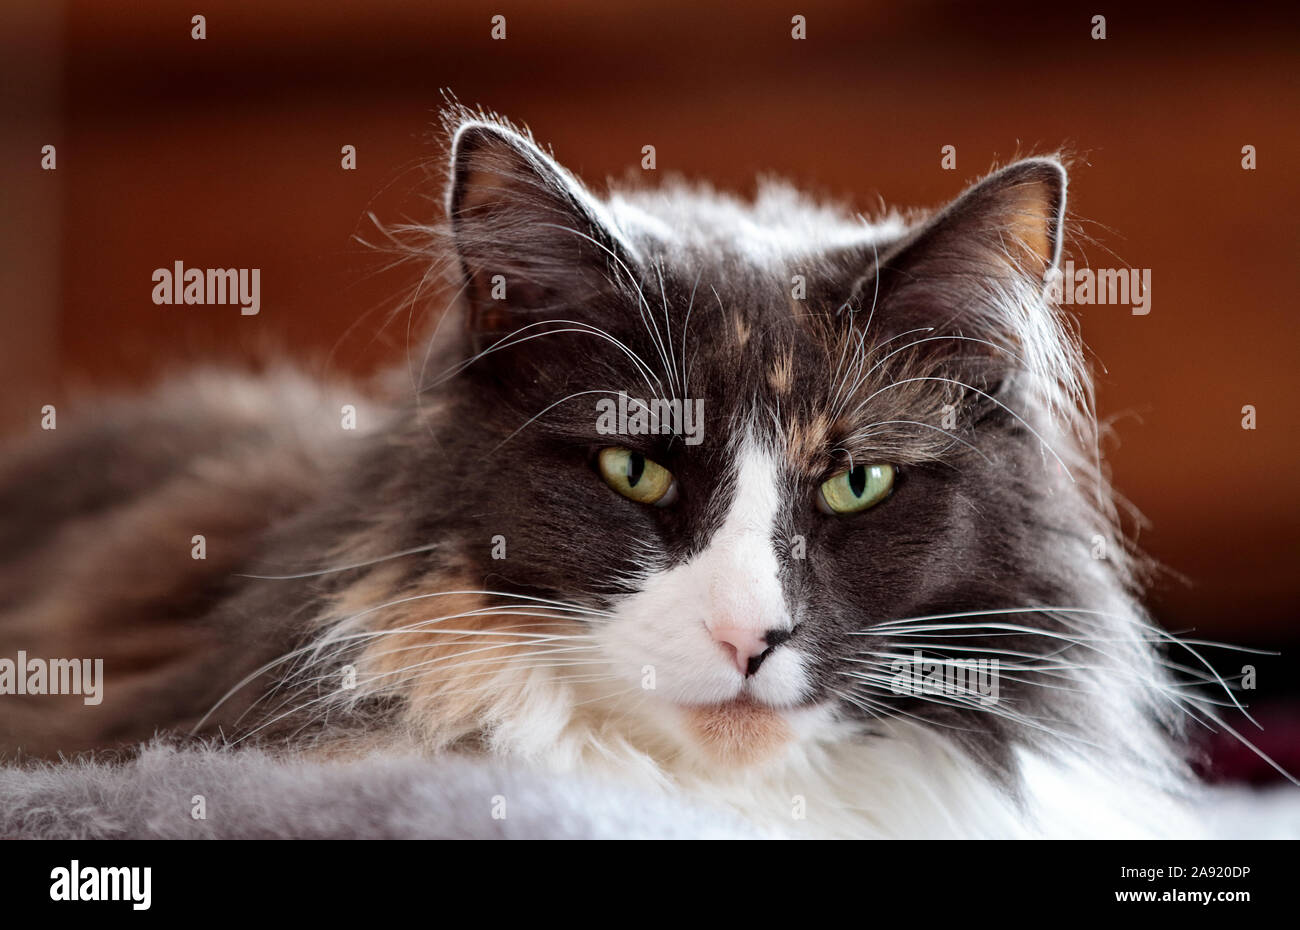 A close up of a norwegian forest cat female lying on gray sheepskin indoors Stock Photo